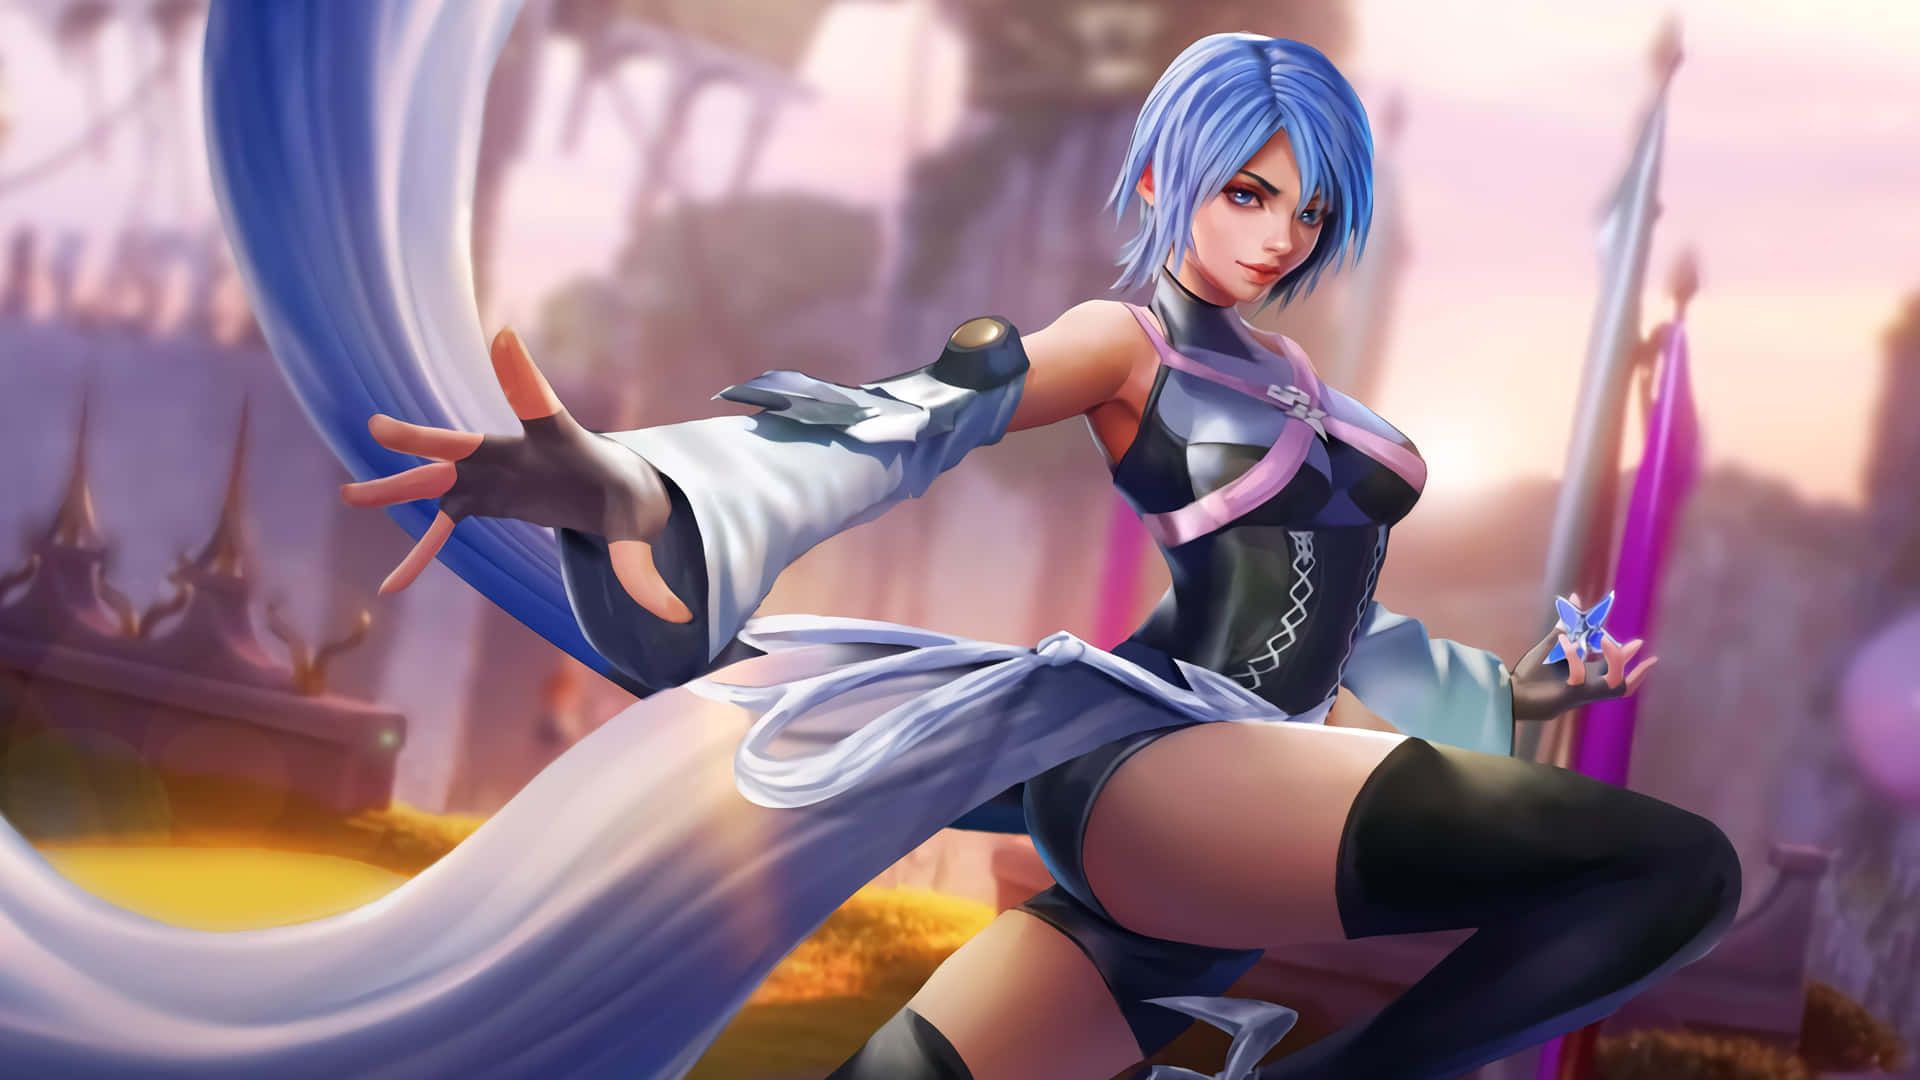 Aqua from Kingdom Hearts shows her bravery amidst darkness. Wallpaper